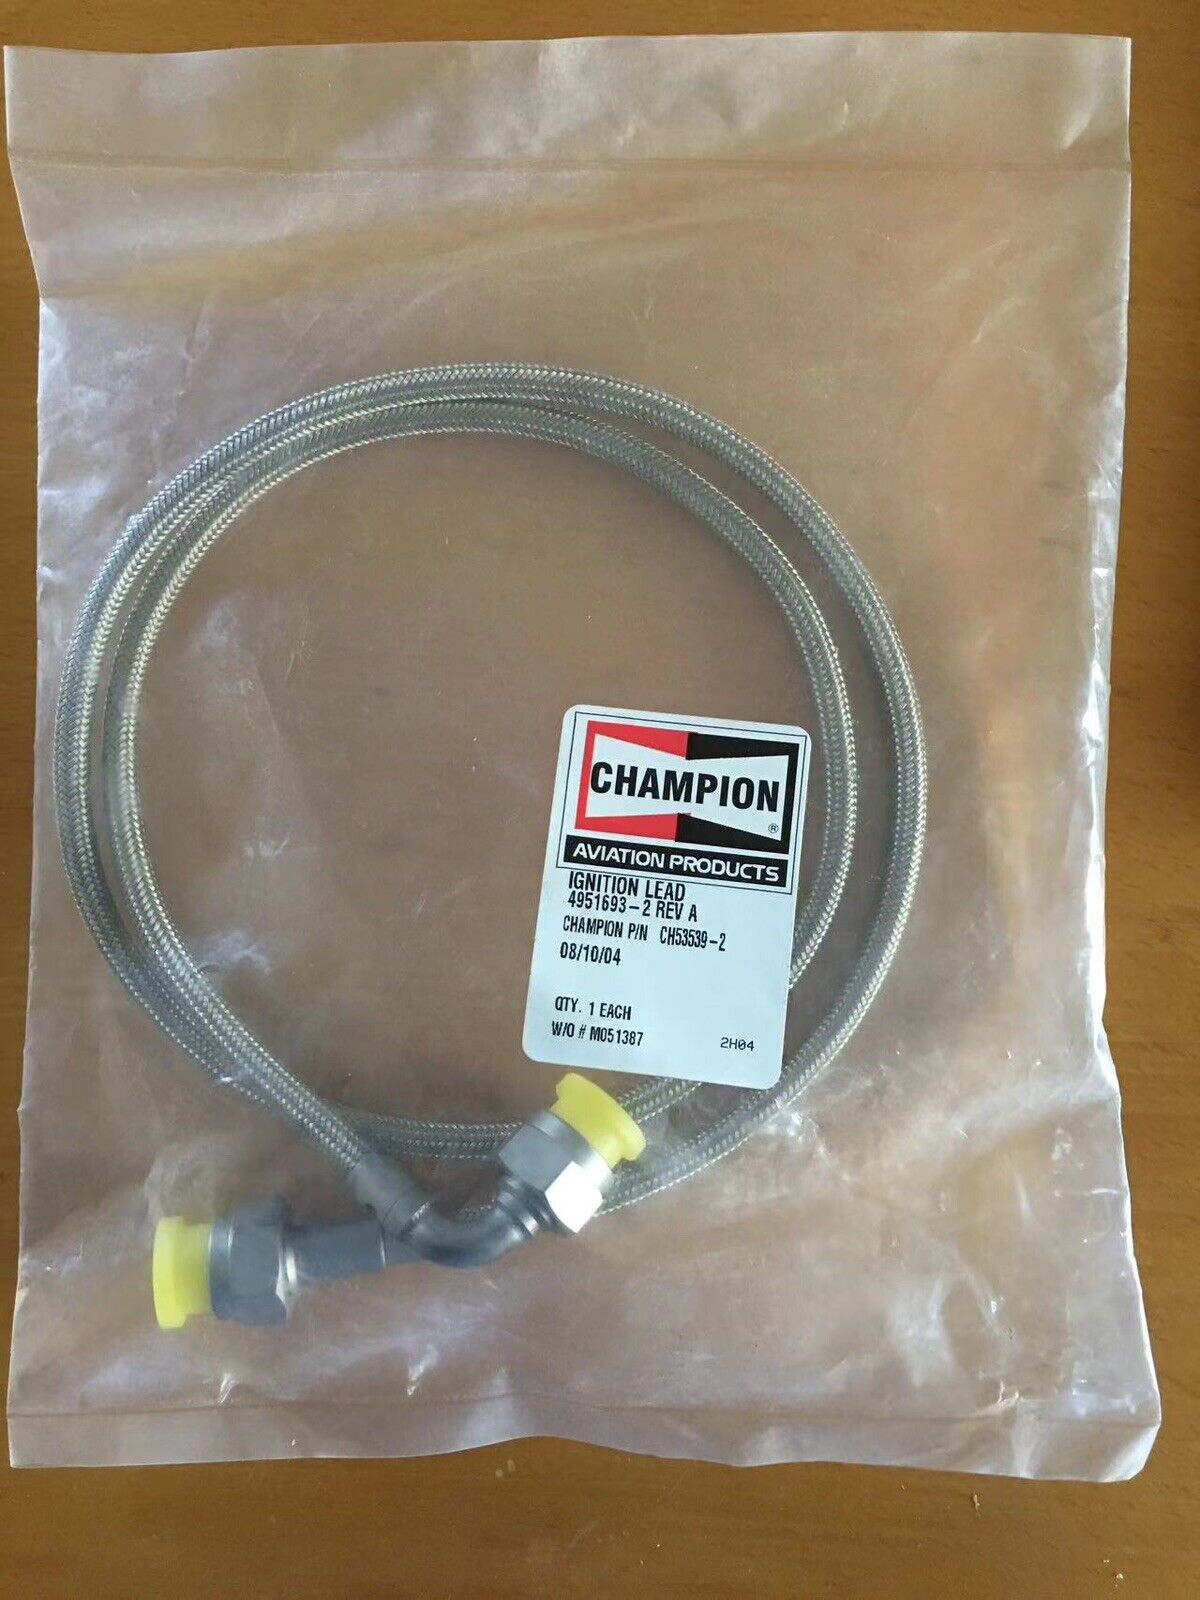 Aviation Aircraft Champion Lead Ignition lead 4951693-2 CH53539-2